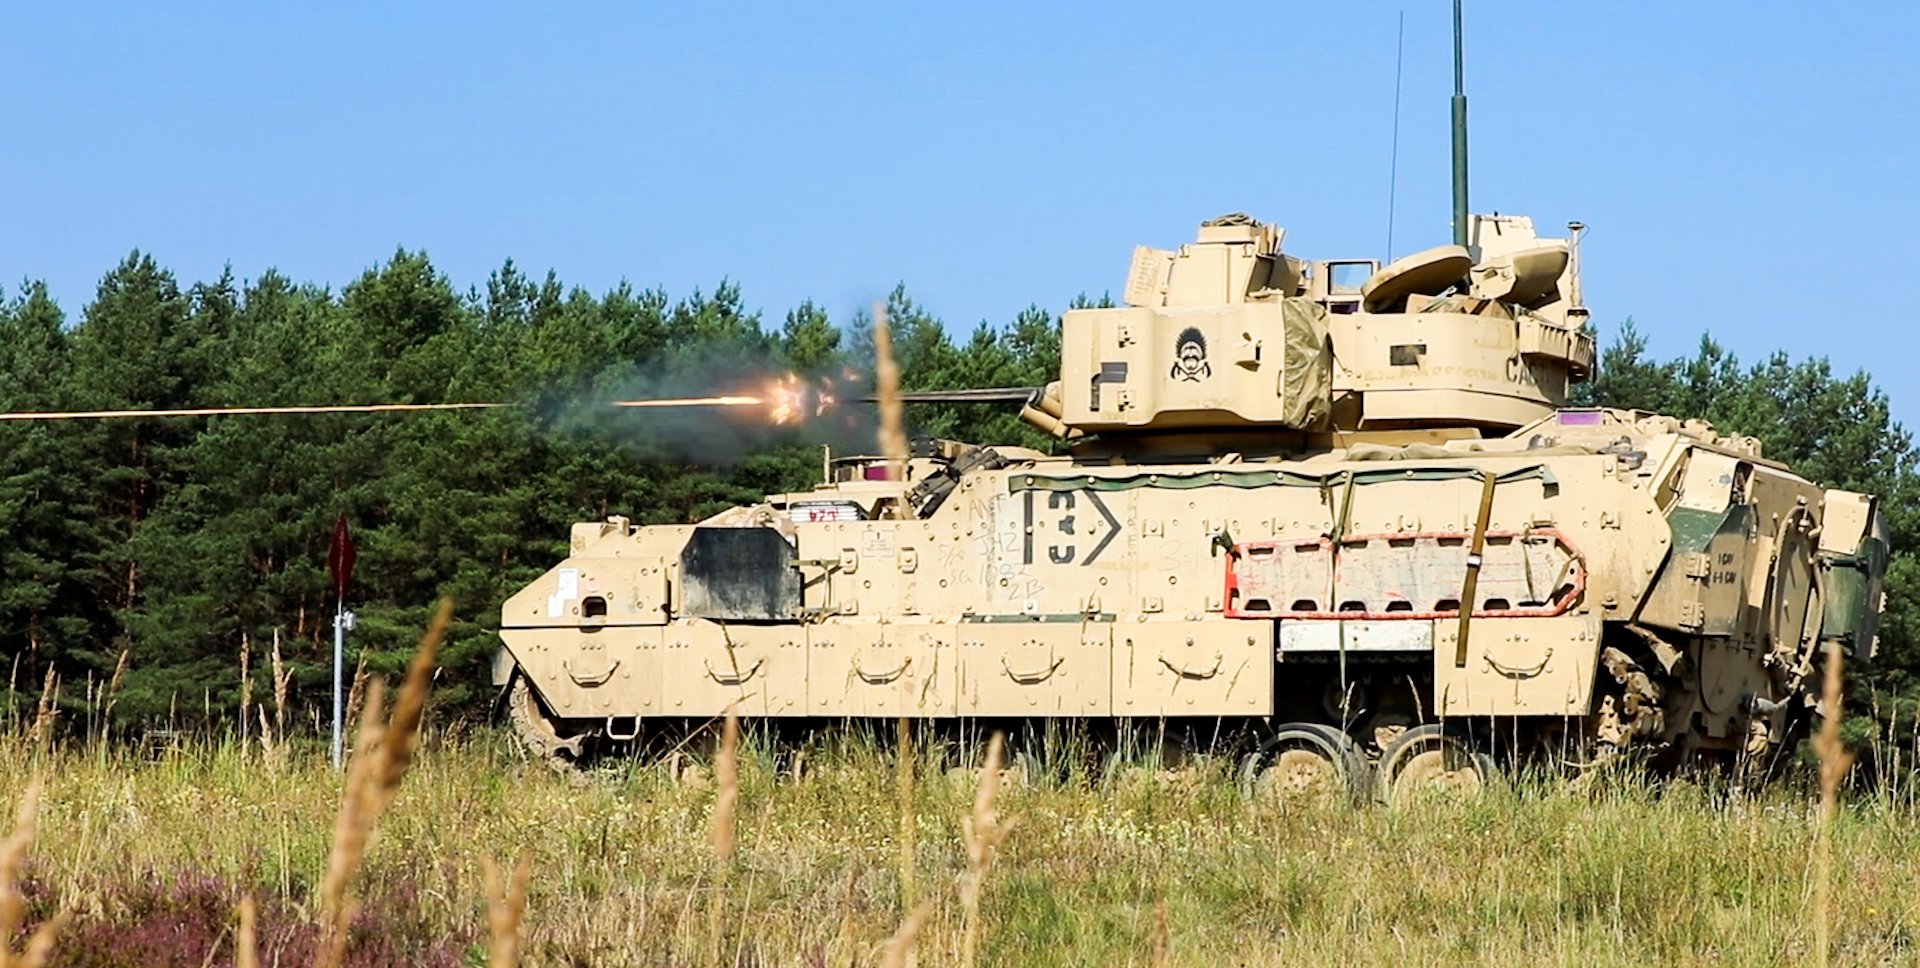 An M2 Bradley fighting vehicle with the 3rd Armored Brigade Combat Team, 1st Cavalry Division fires on a range in Poland. President Joe Biden said the US may soon send the heavily armored troops carriers to Ukraine. Bradley's would be the heaviest ground combat equipment supplied to Ukraine by the US. Photo by Staff Sgt. Charles Porter.